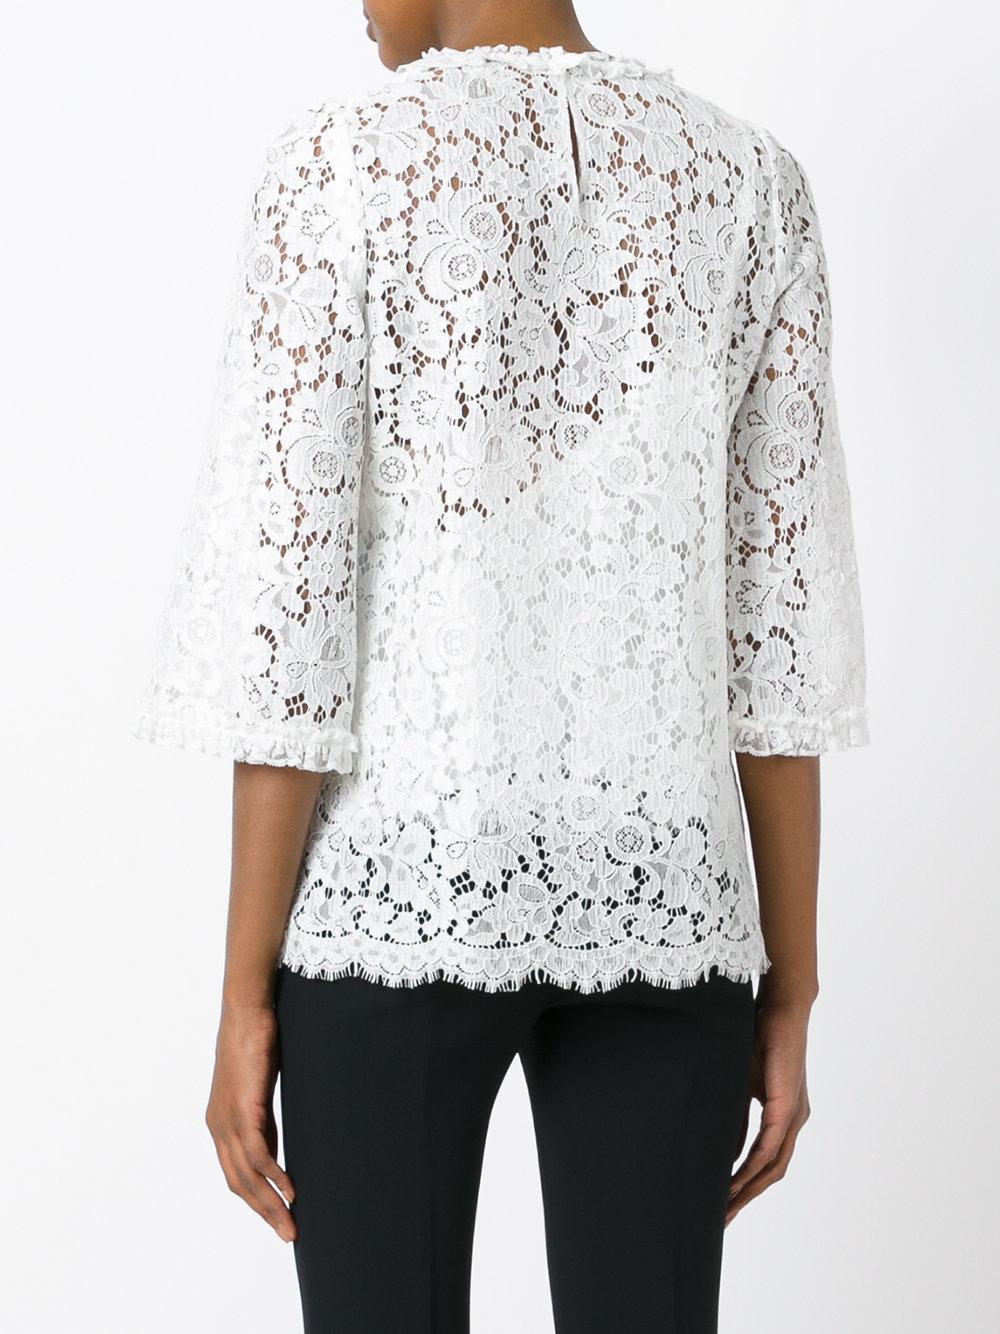 Lyst - Dolce & Gabbana Lace Top in White